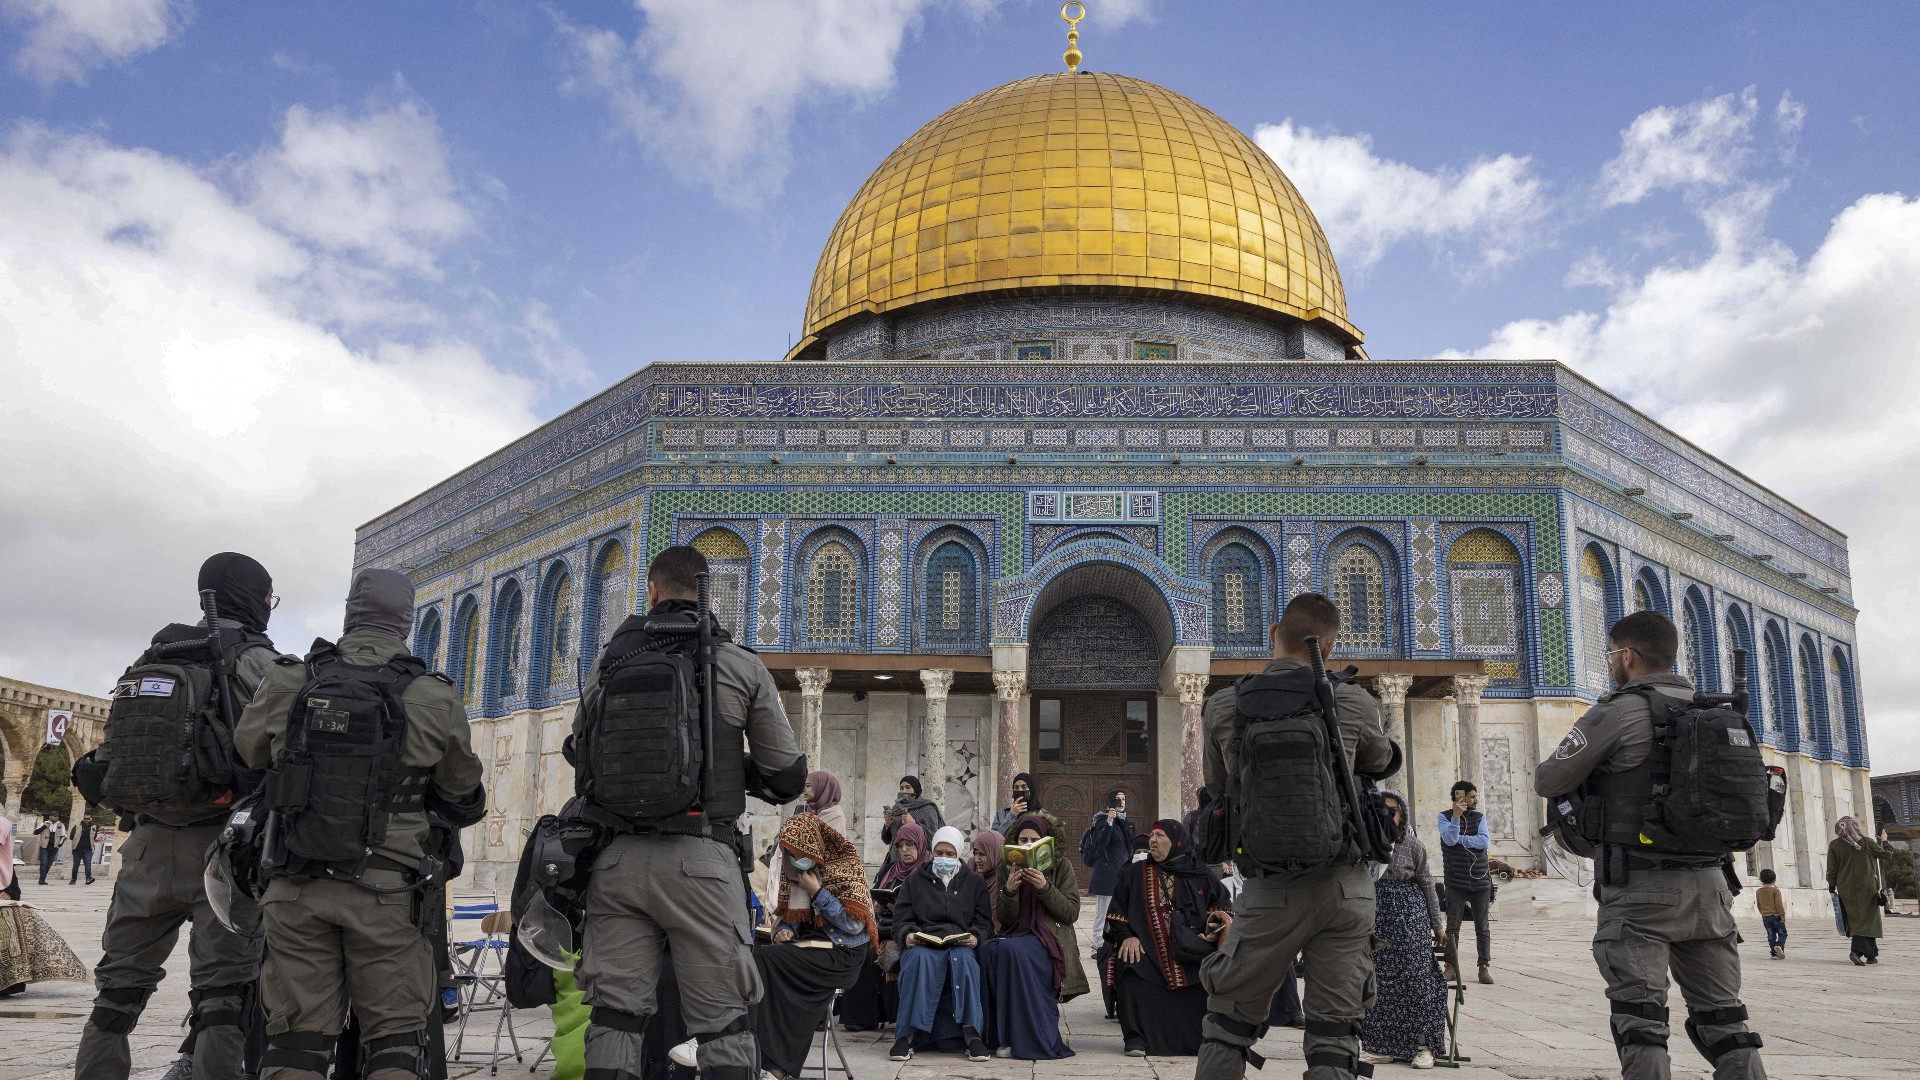 Israeli policemen stand in front of Muslim women praying in front of the Dome of the Rock mosque in the old city of Jerusalem on 20 April, 2022